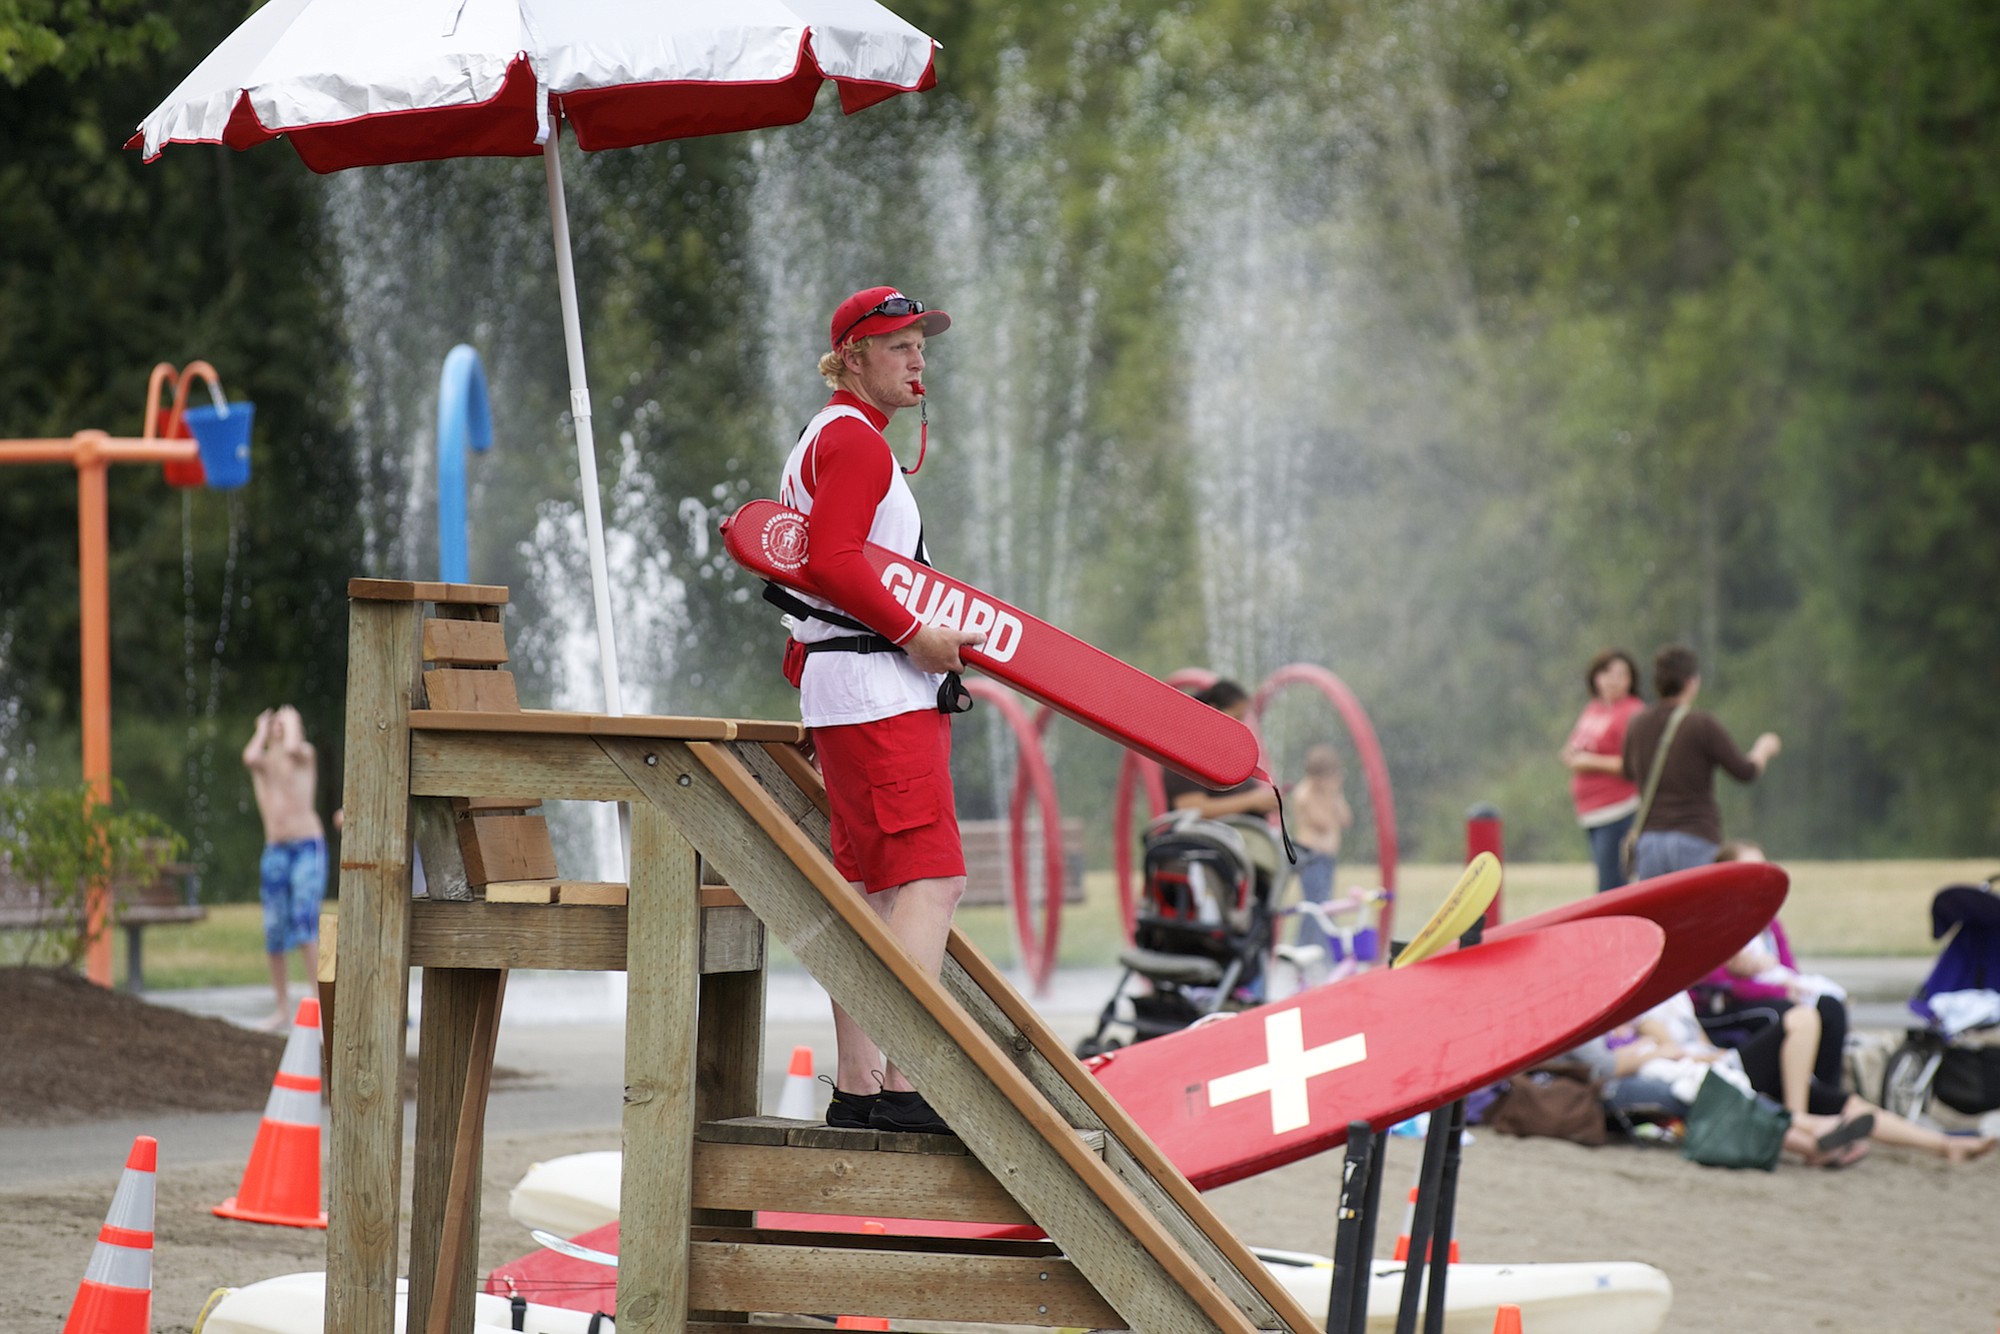 A lifeguard watches over swimmers at Klineline Pond.